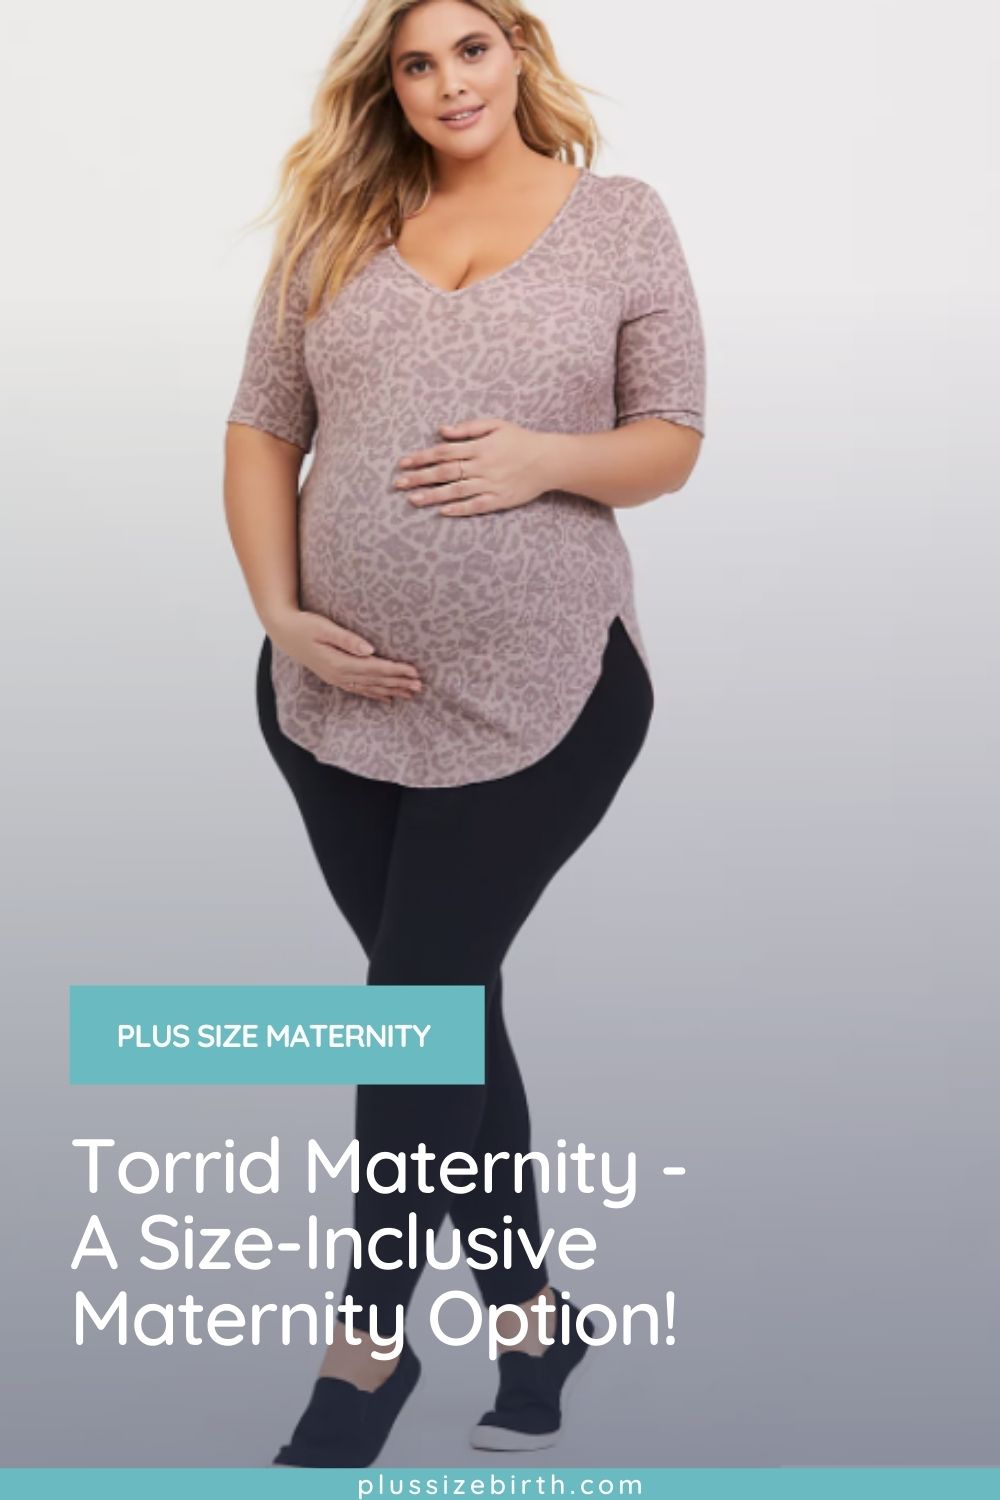 Maternity clothes for plus size women